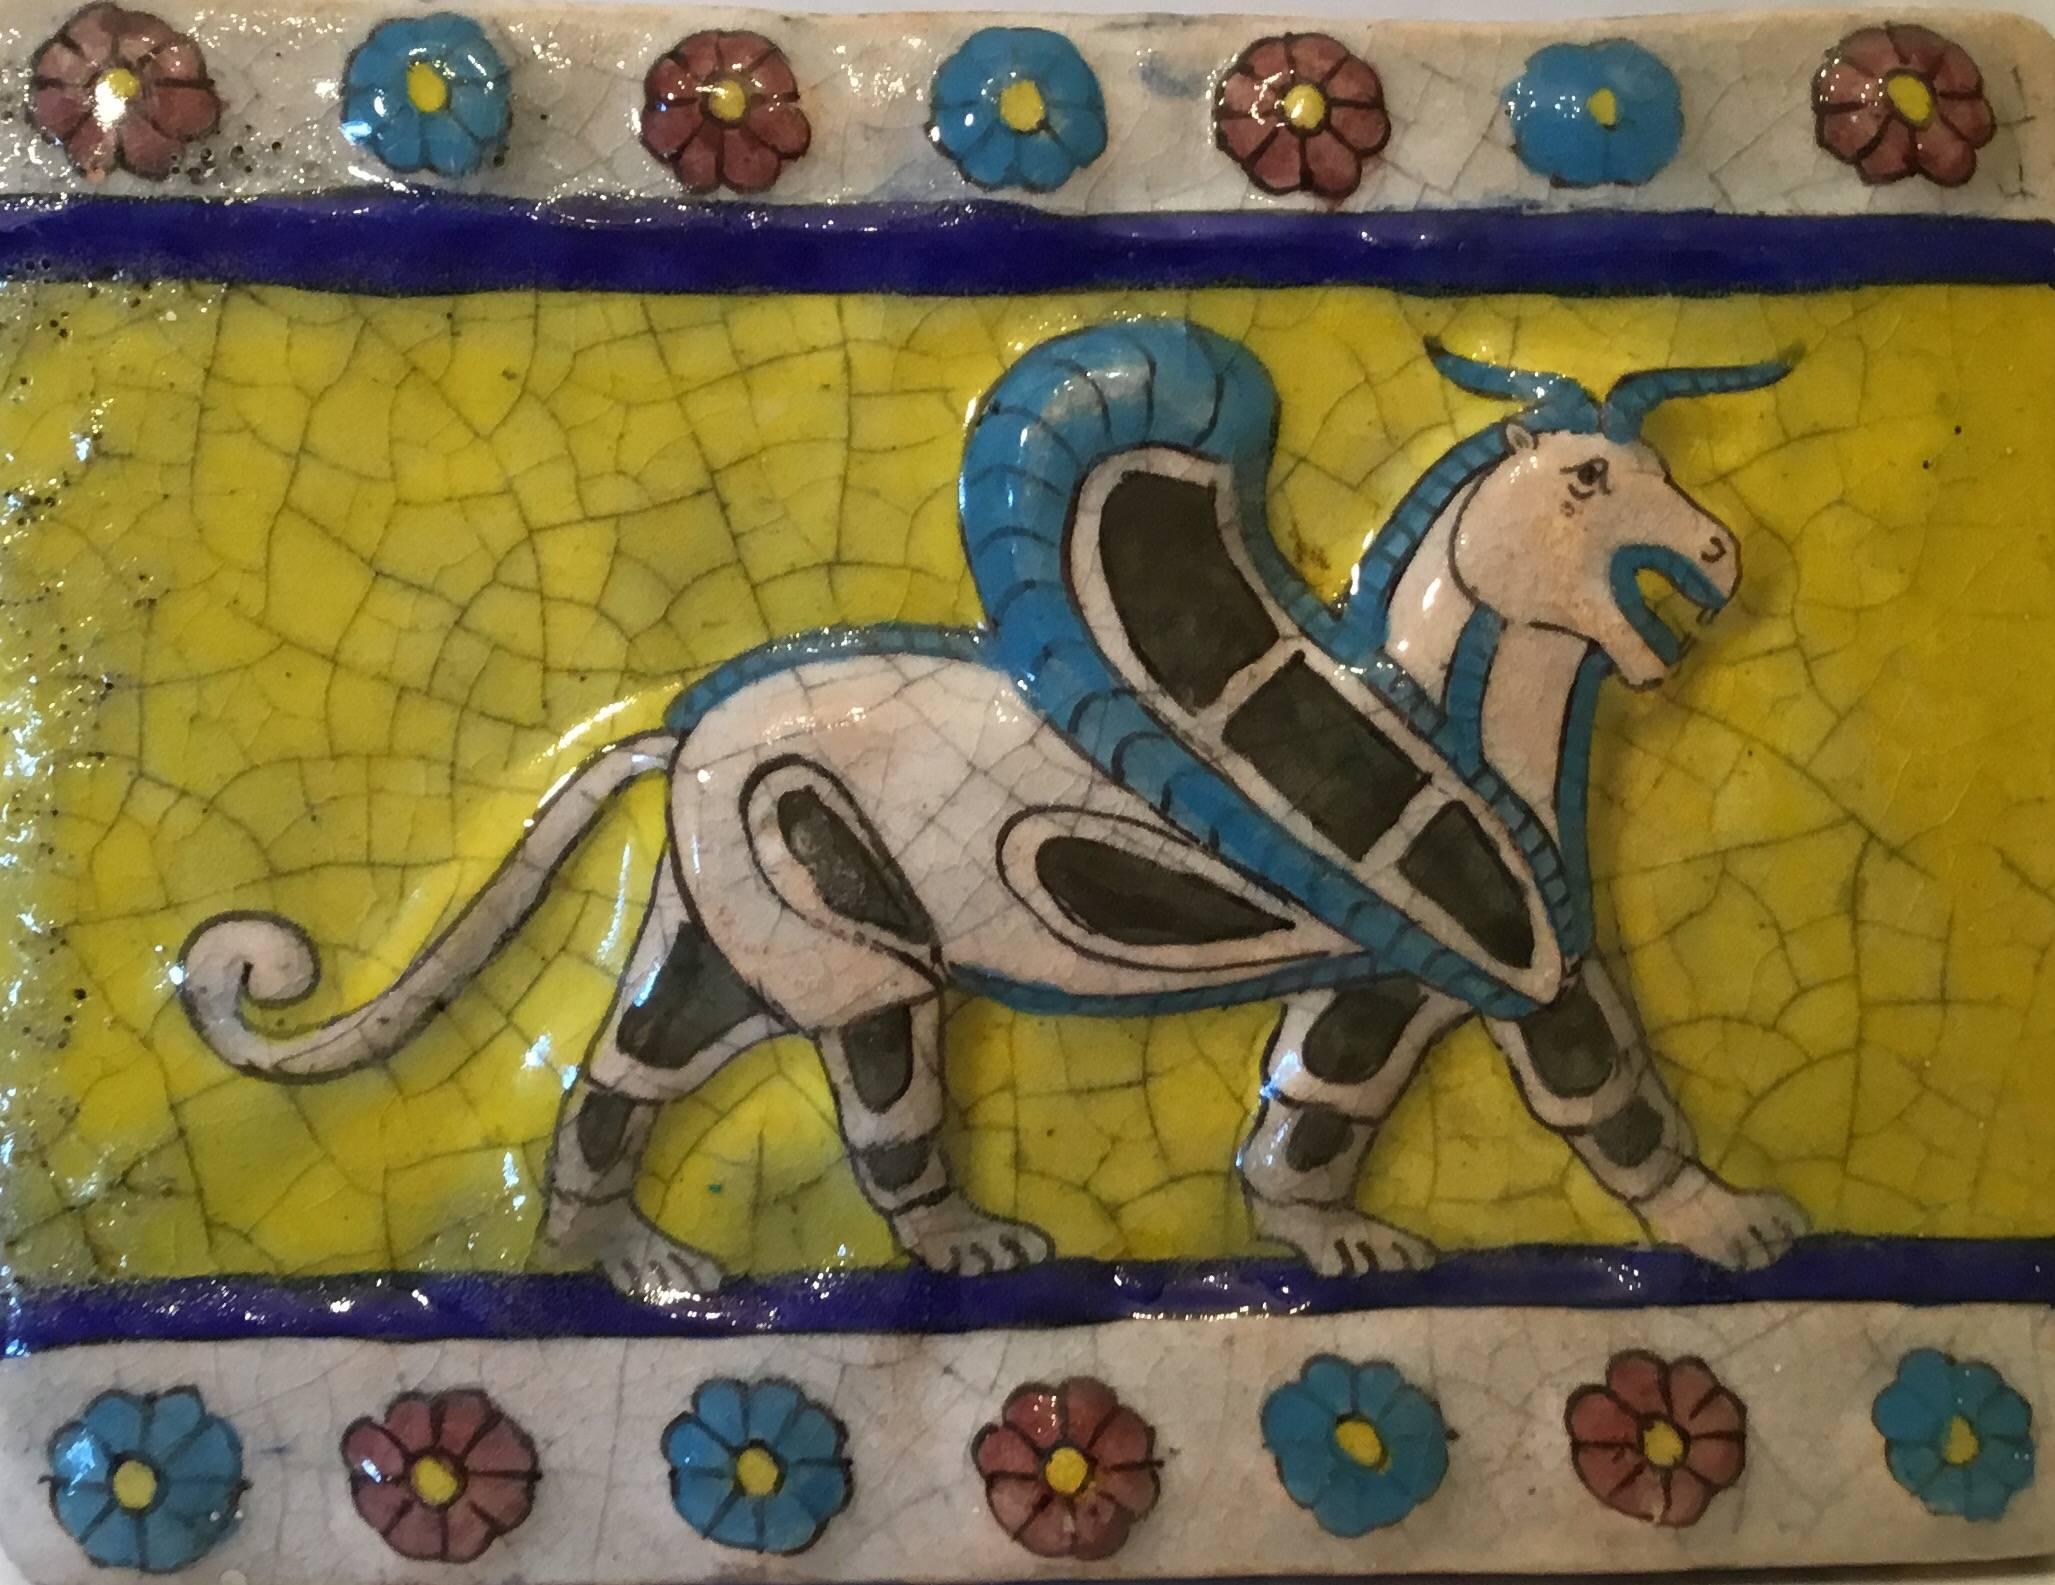 Beautiful Persian tile made of ceramic with colorful Persian mythological animal could hang on the wall too.